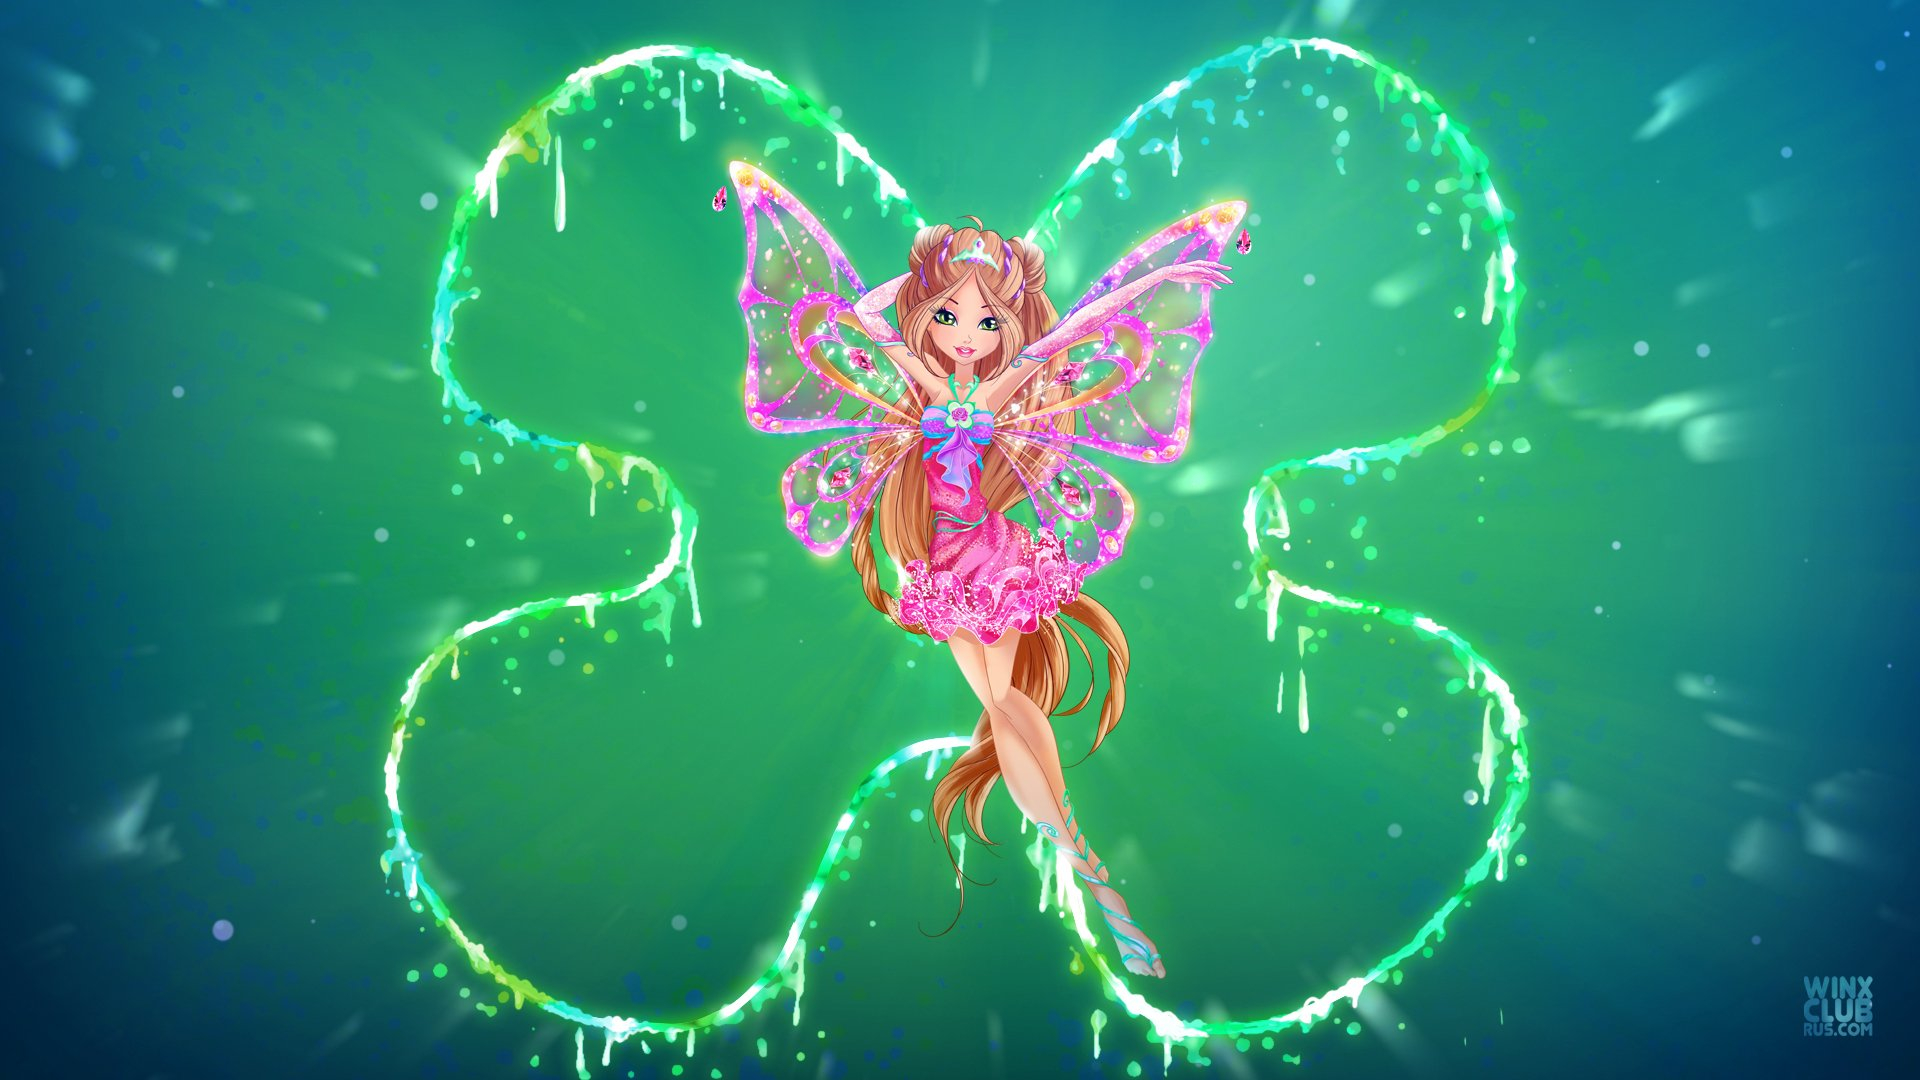 1920x1080 50+ Winx Club HD Wallpapers and Backgrounds